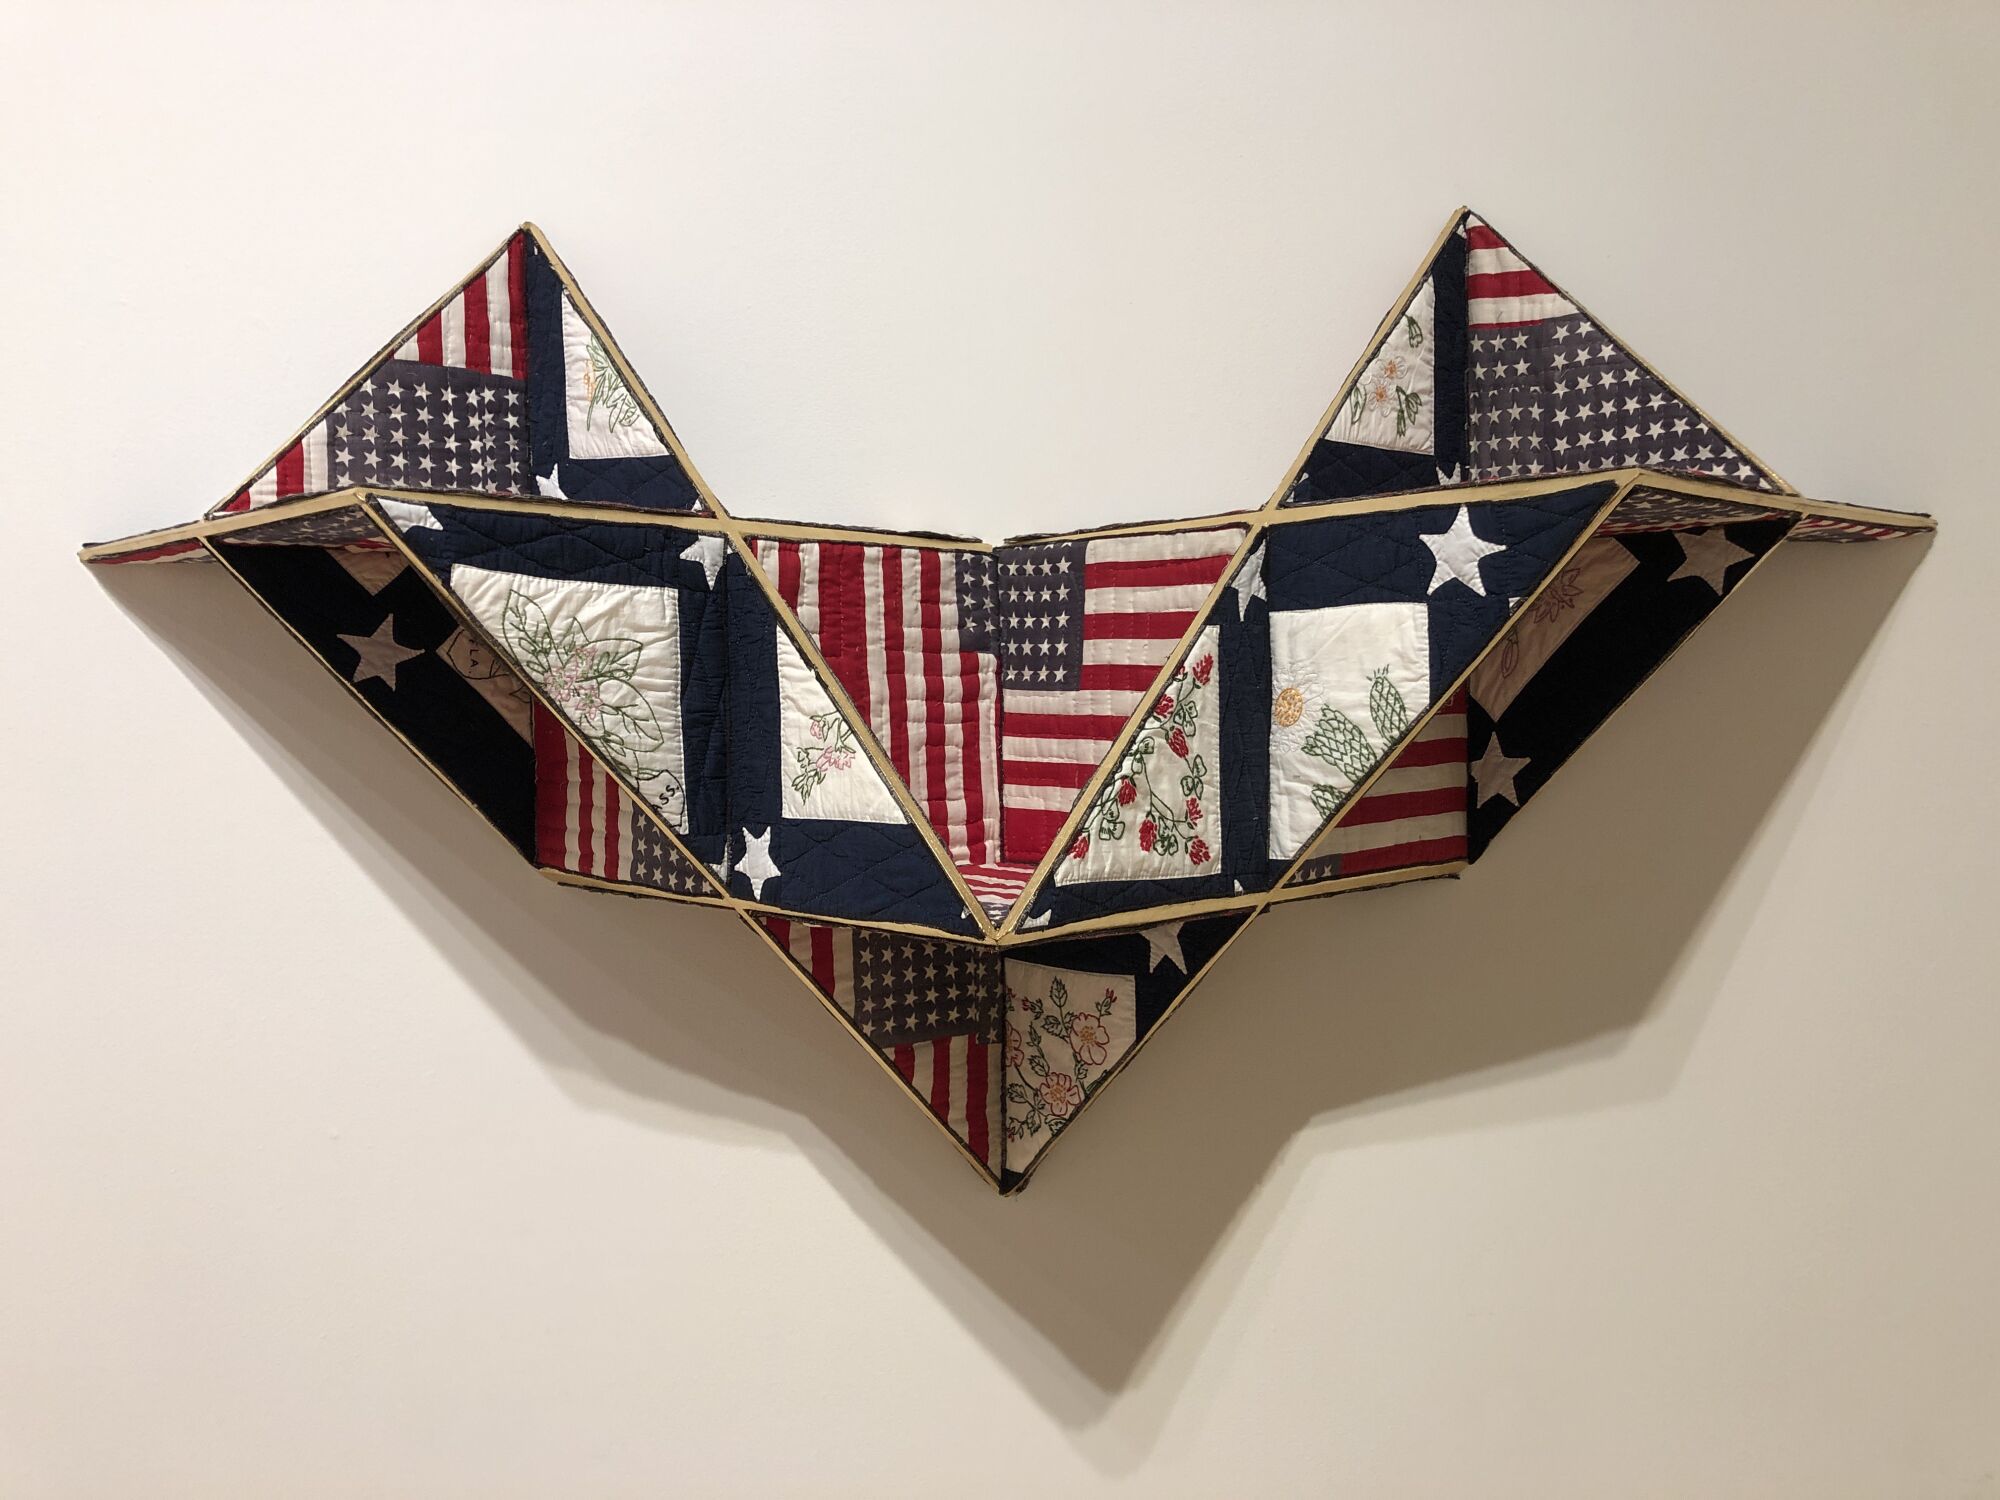 A work of geometric sculpture titled "Reconstruction" employs patches of old quilts and American flags.